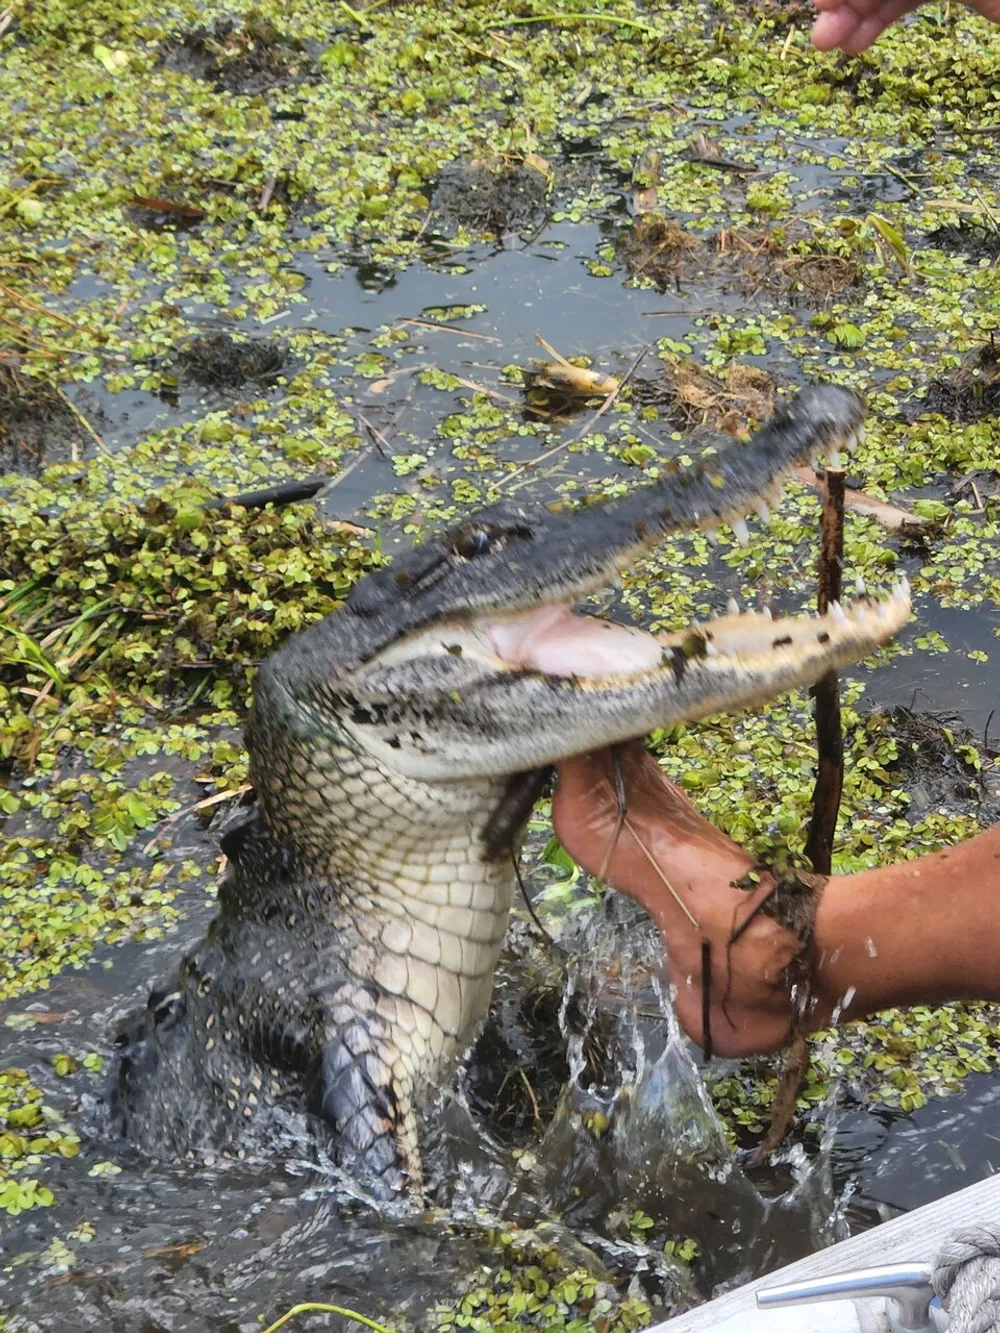 A person is interacting with an alligator which has its mouth open revealing its teeth amidst a waterway with floating vegetation